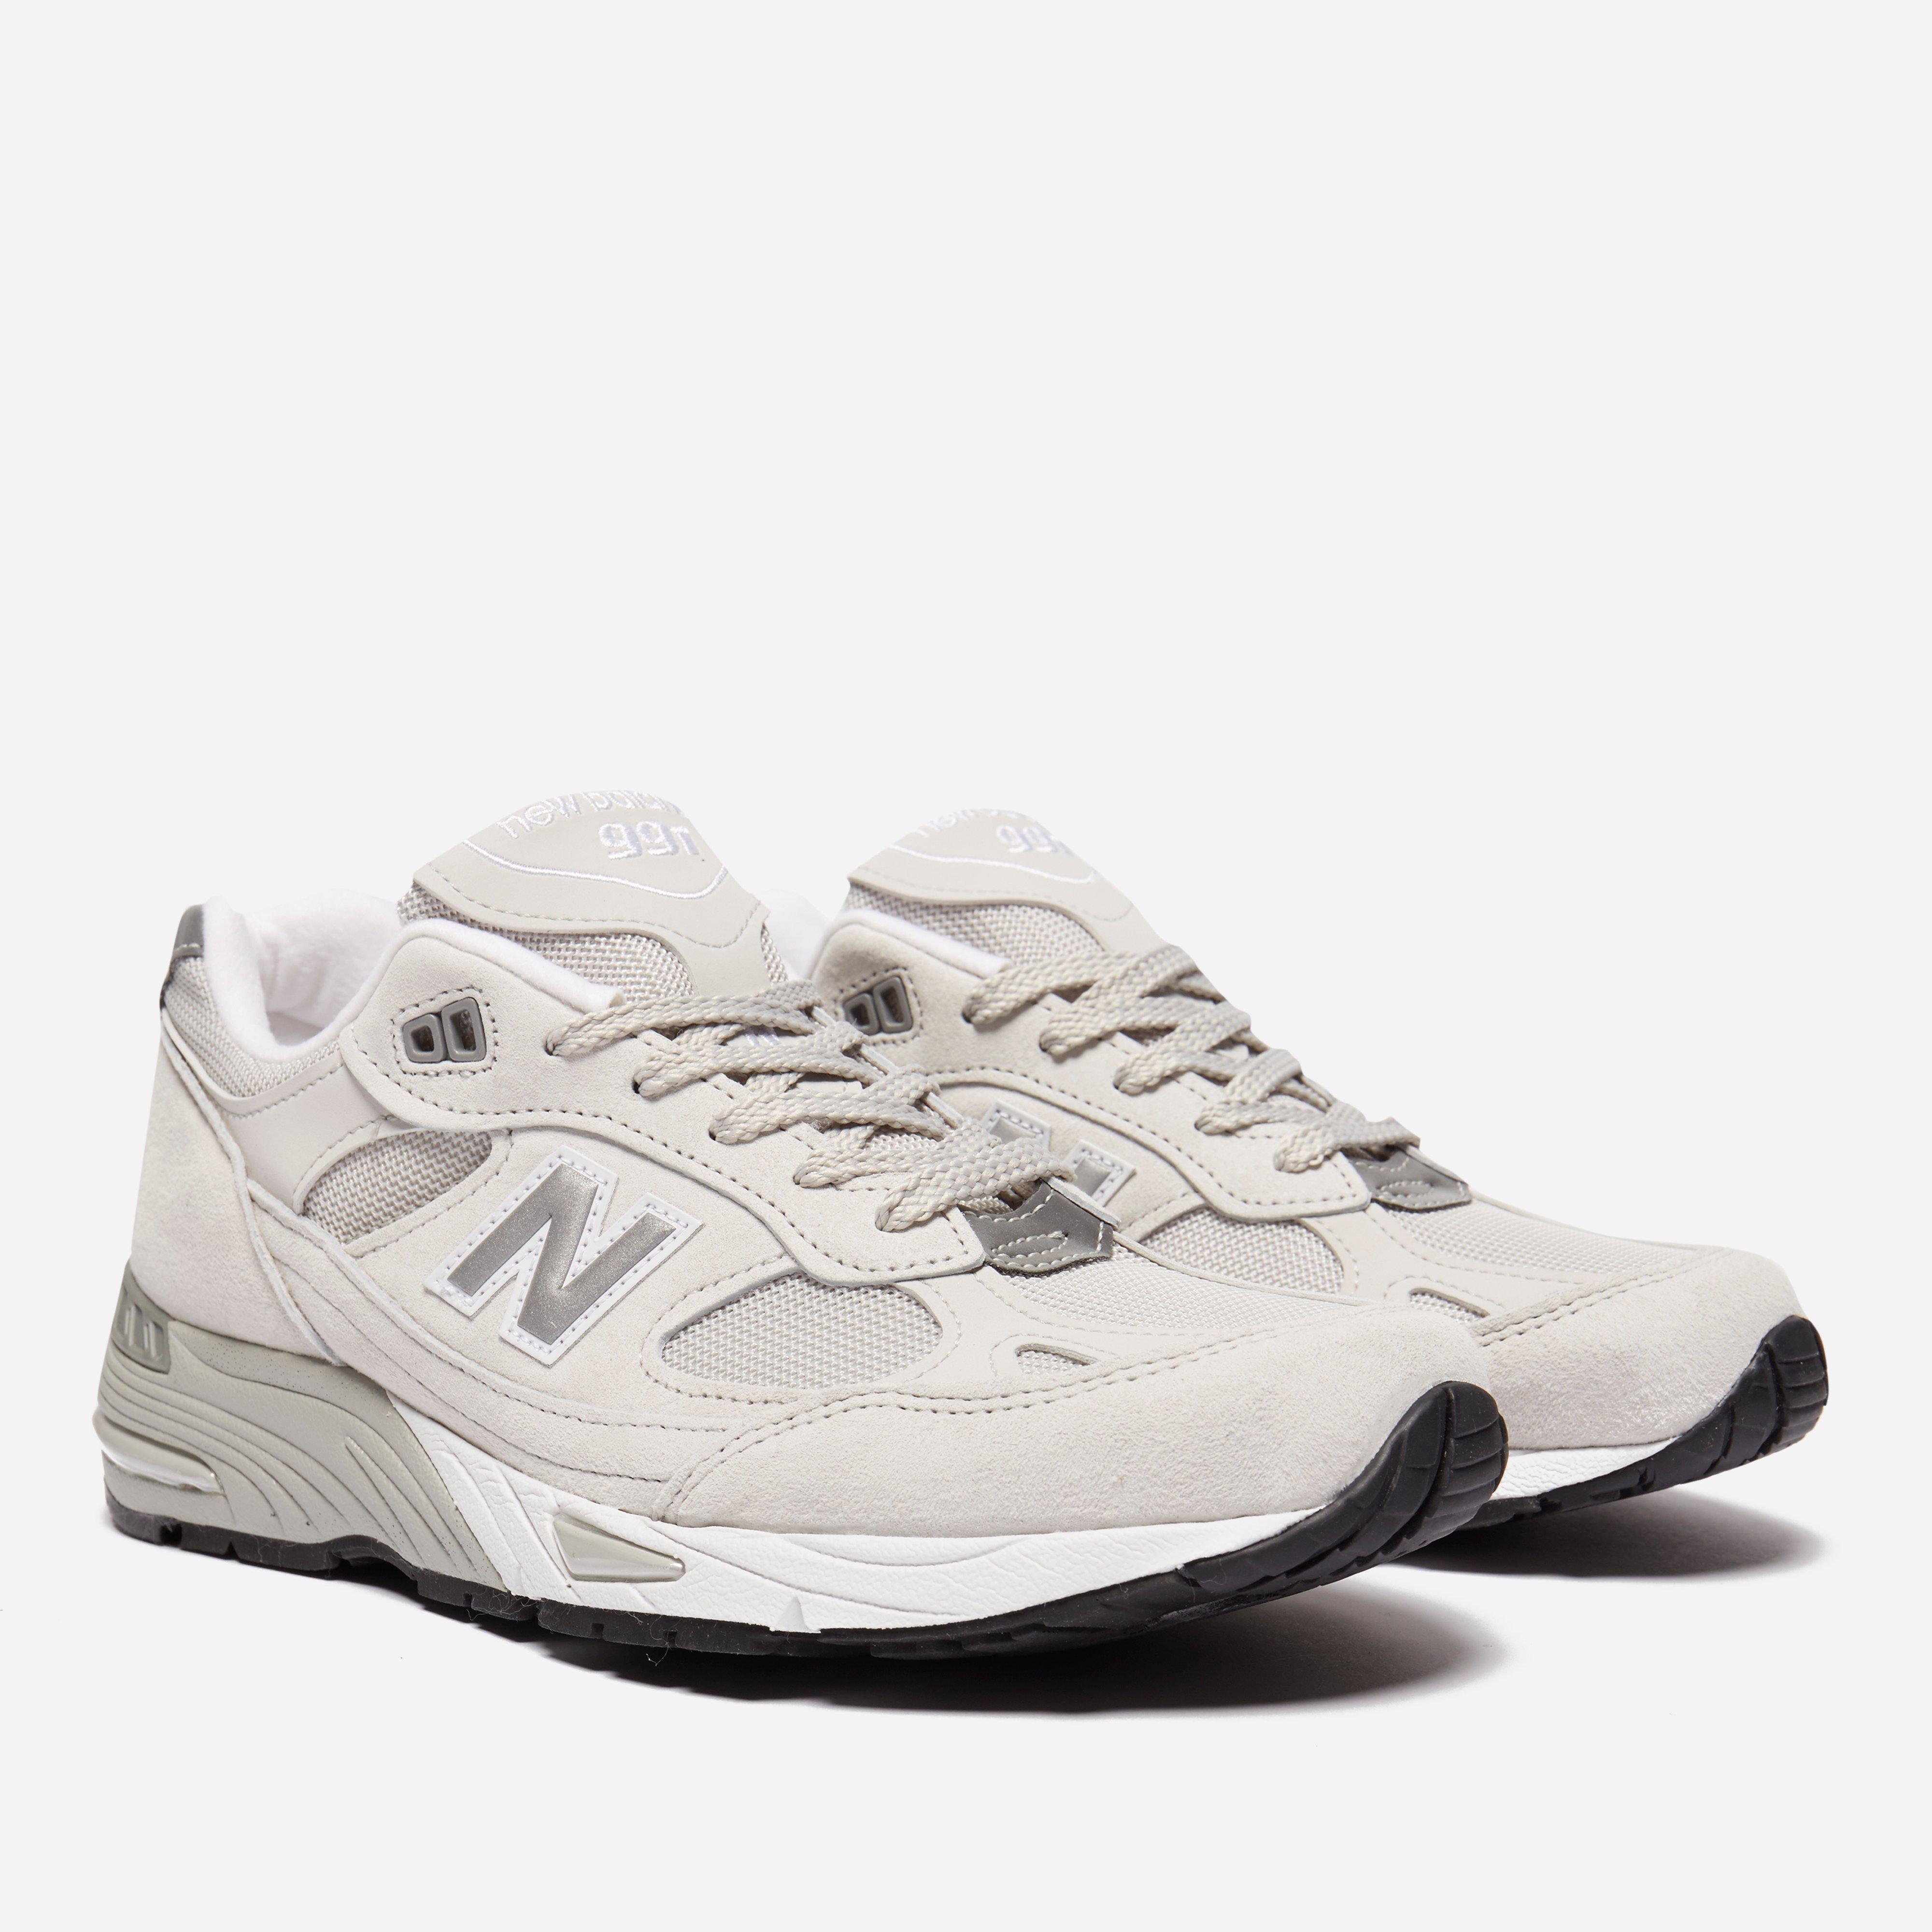 New Balance M 991 Pow Made In England in White for Men - Lyst